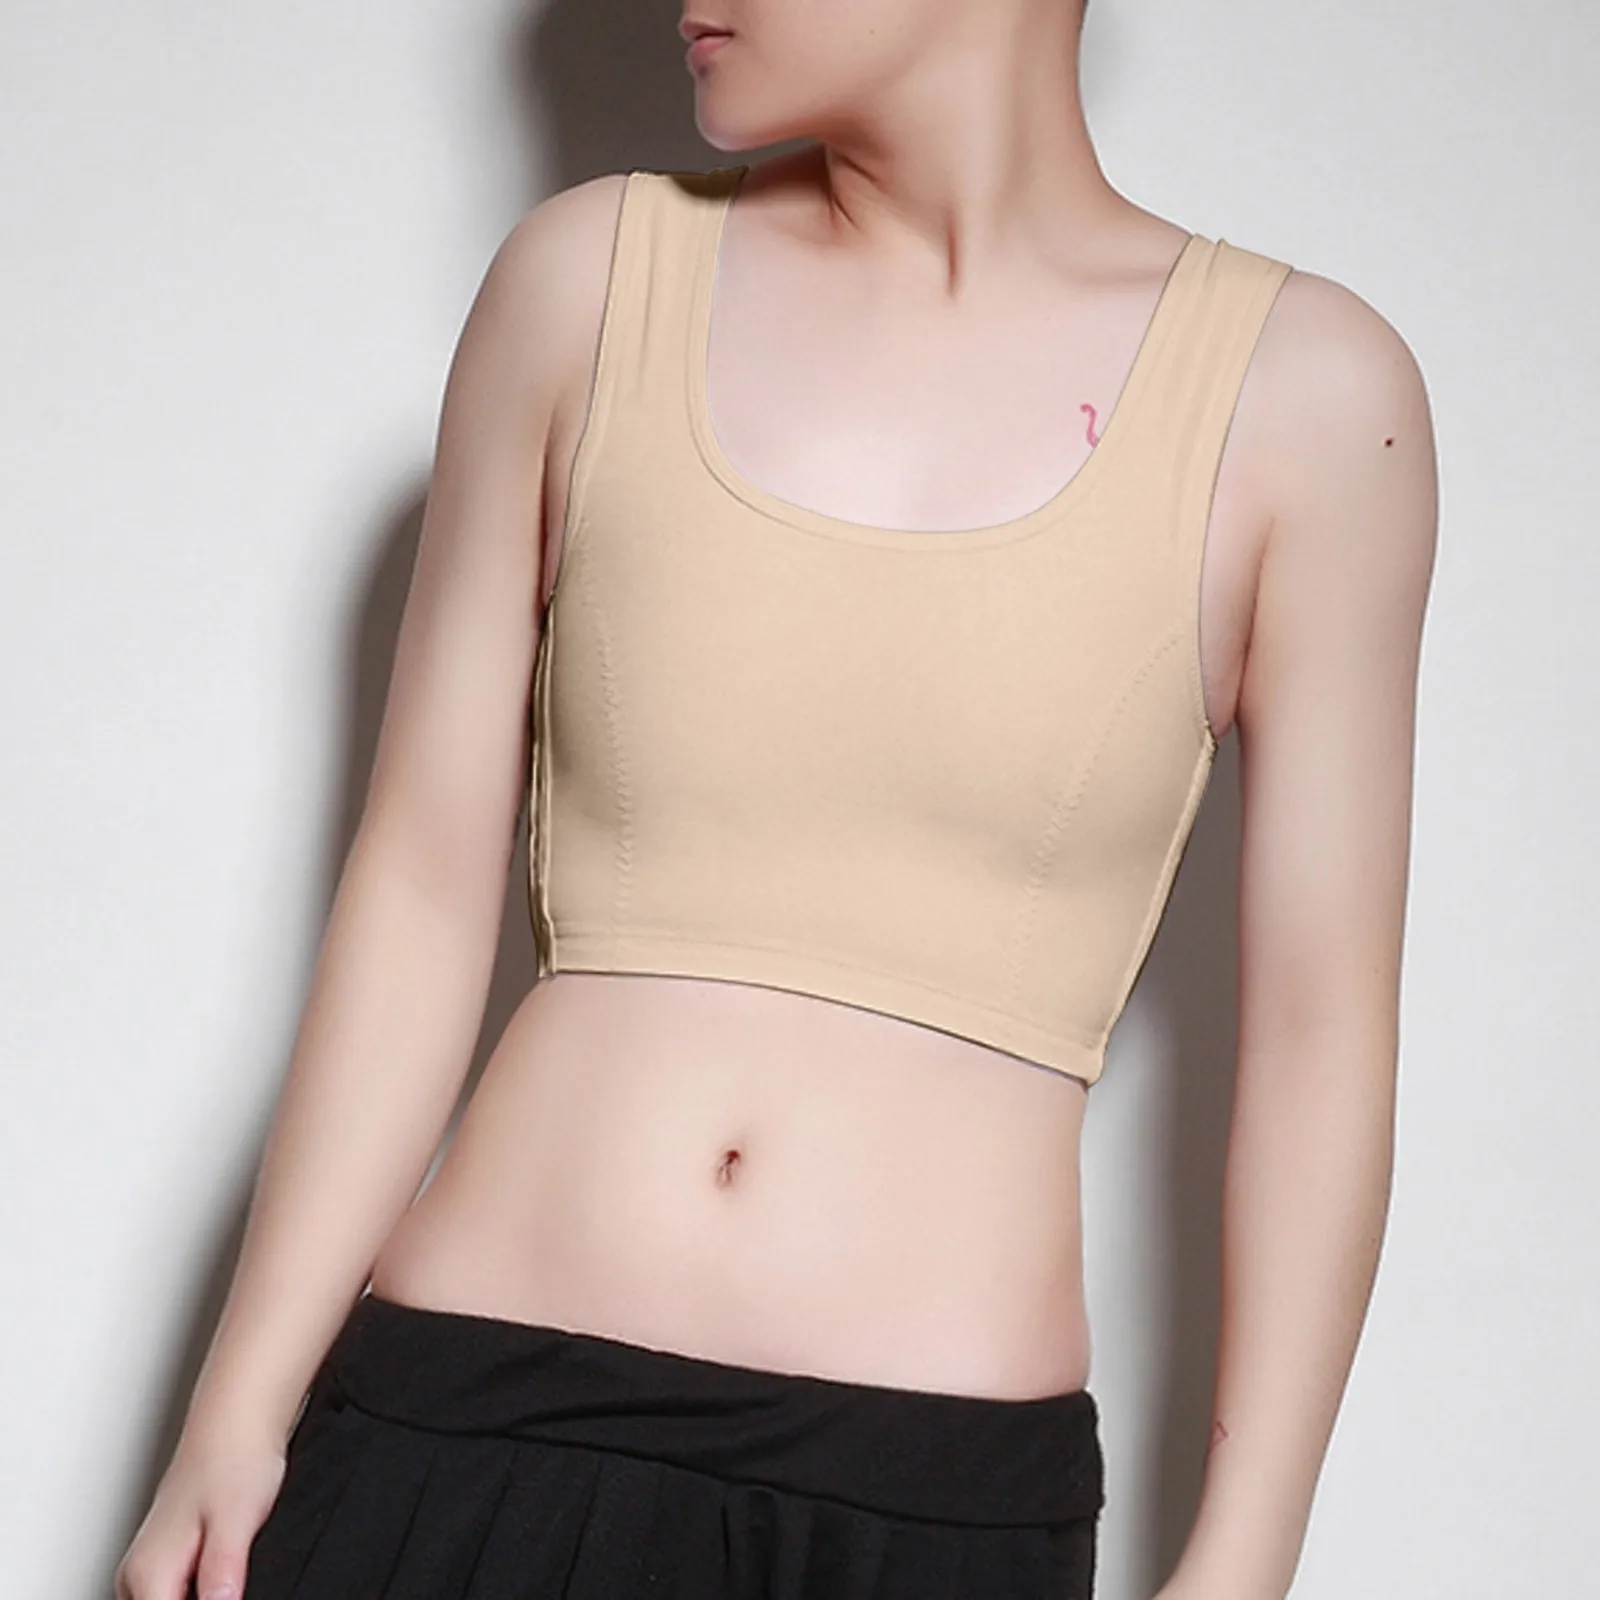 Women Solid Color Breast Side Buckle Short Chest Casual Tran Top Breathable Buckle Tops Casual Vest Breast Binder Tops Shapers strapless shapewear